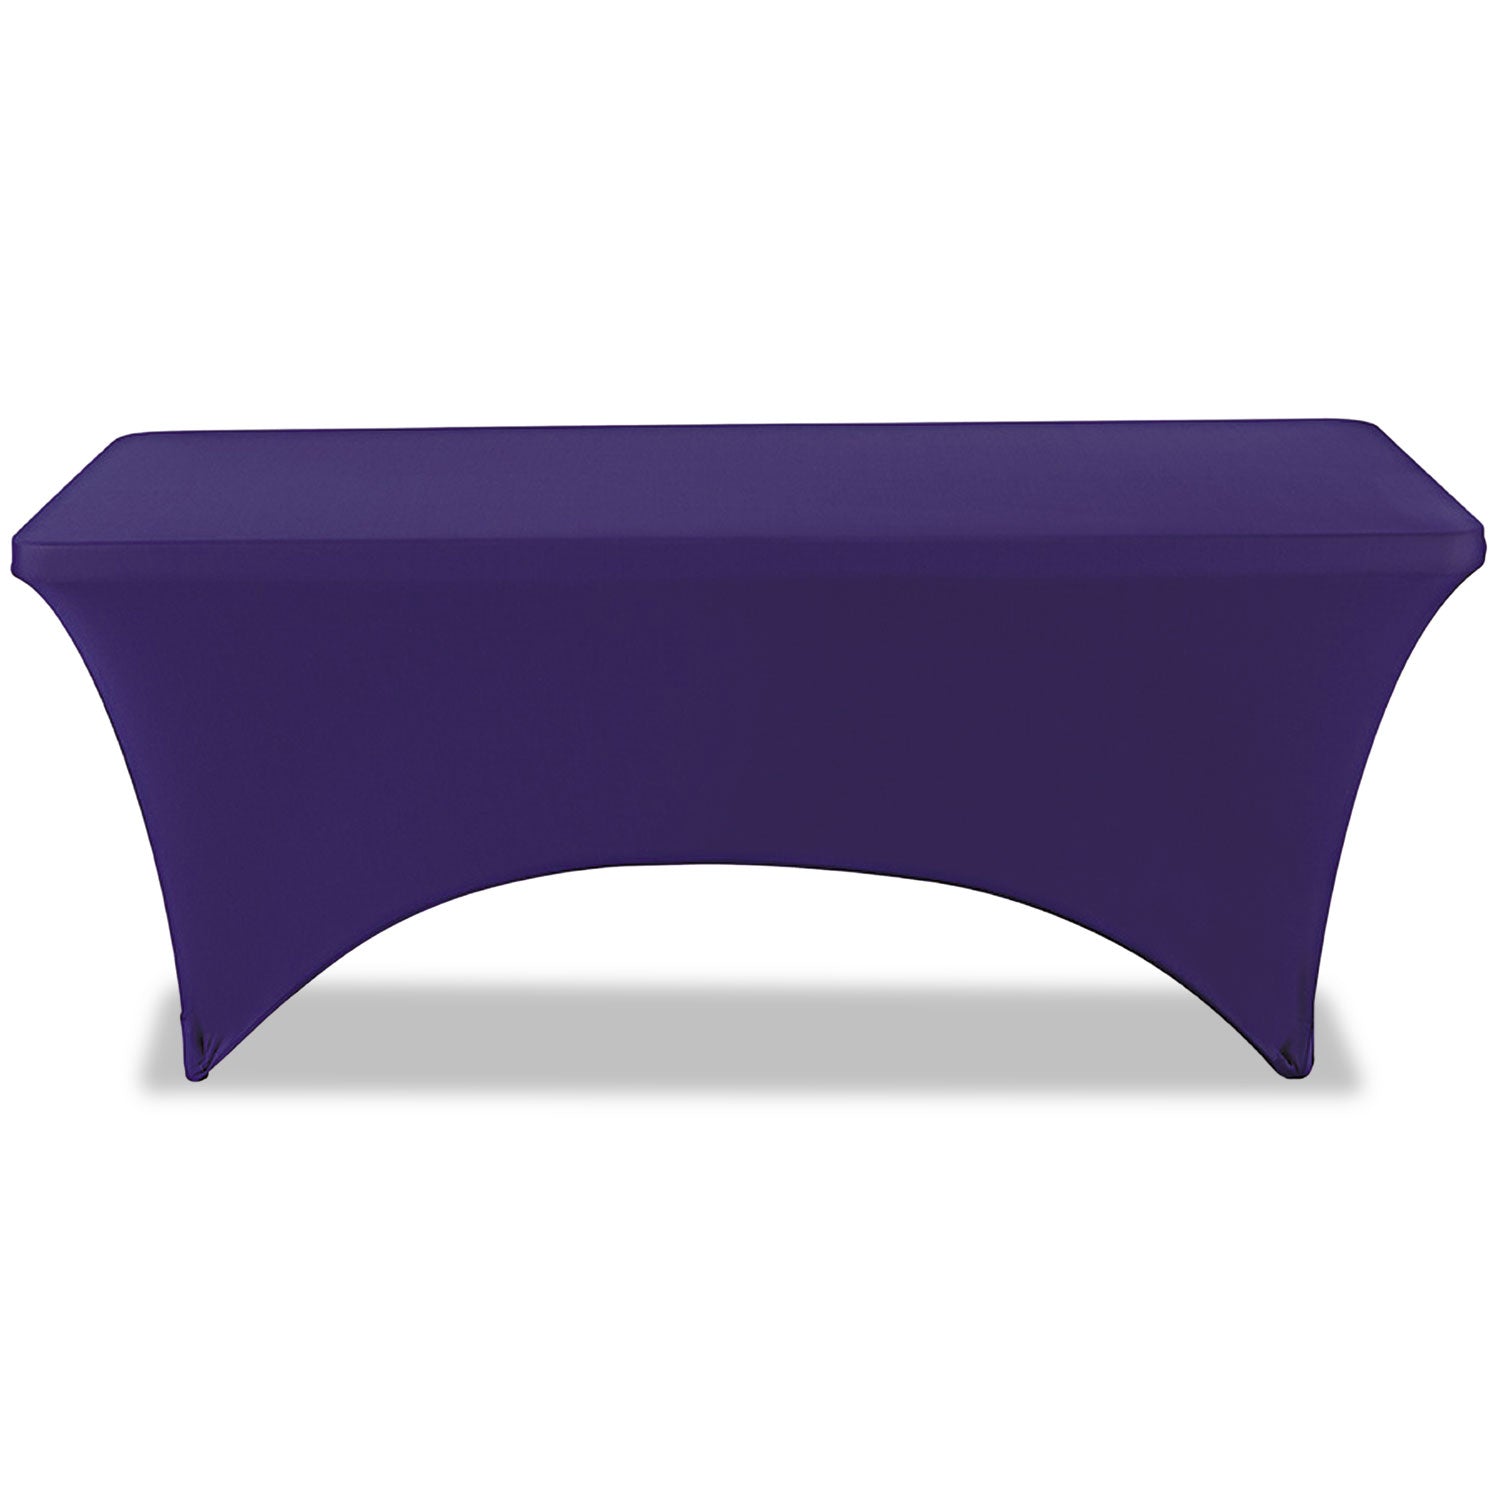 iGear Fabric Table Cover, Polyester/Spandex, 30 "x 72", Blue - 